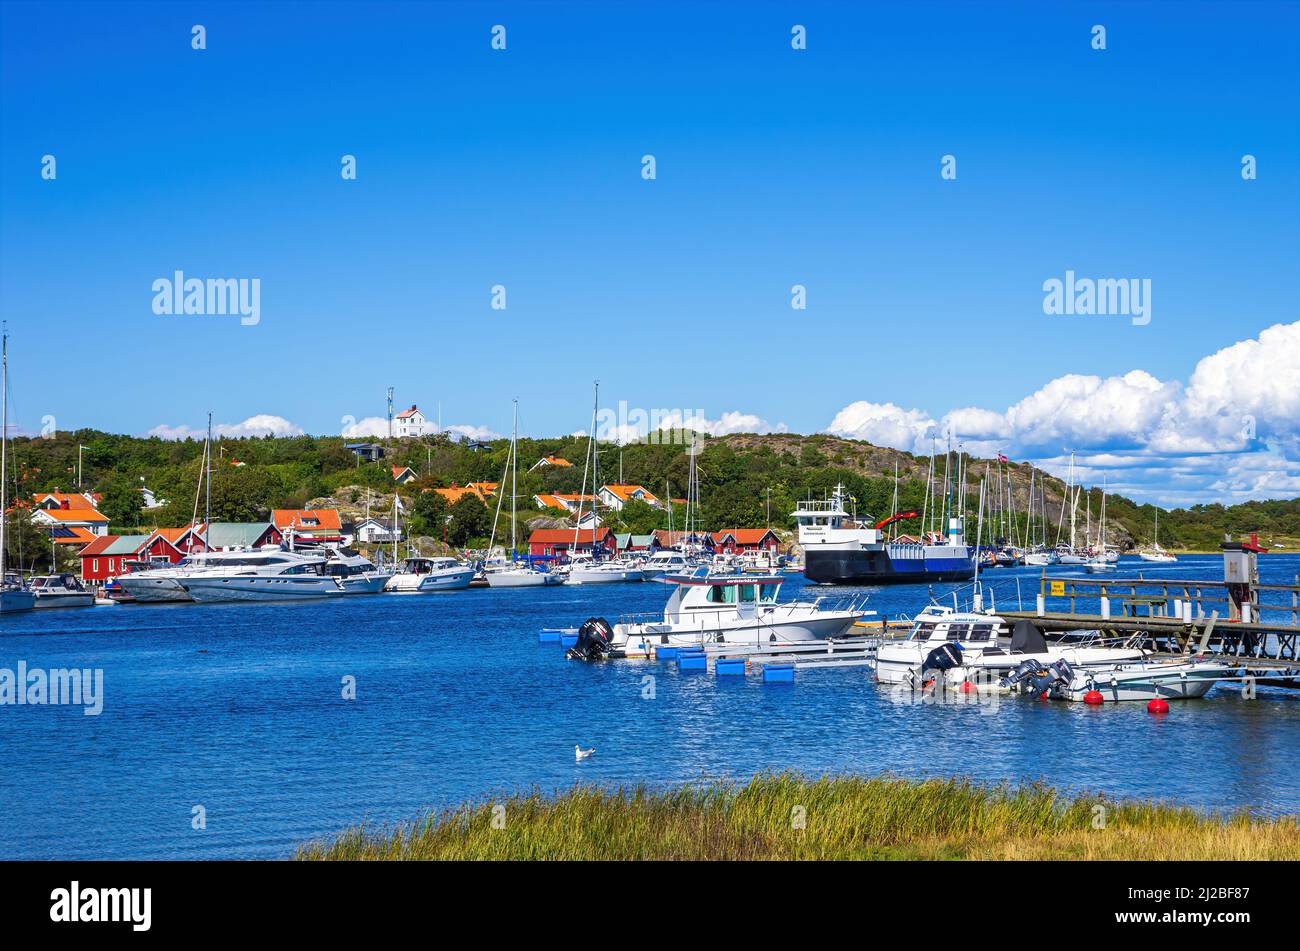 South Koster Island, Bohuslän, Västra Götalands län, Sweden - August 11, 2016: Jetty with boats and boat sheds in the village of Langegarde. Stock Photo